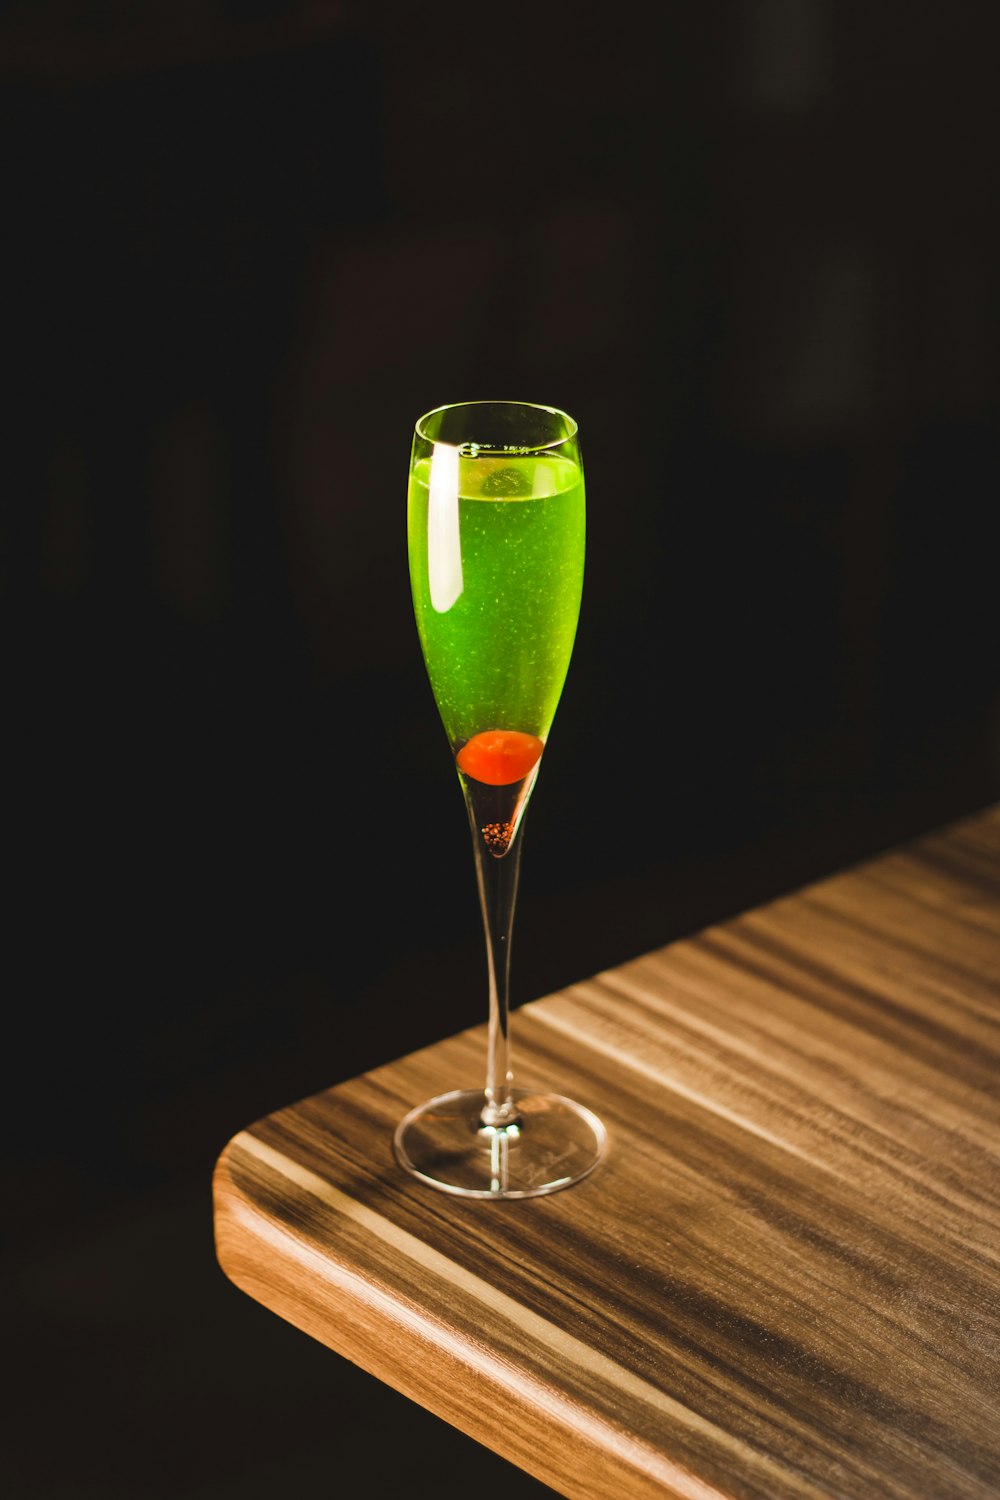 green drink-filled tulip glass on corner of wooden table